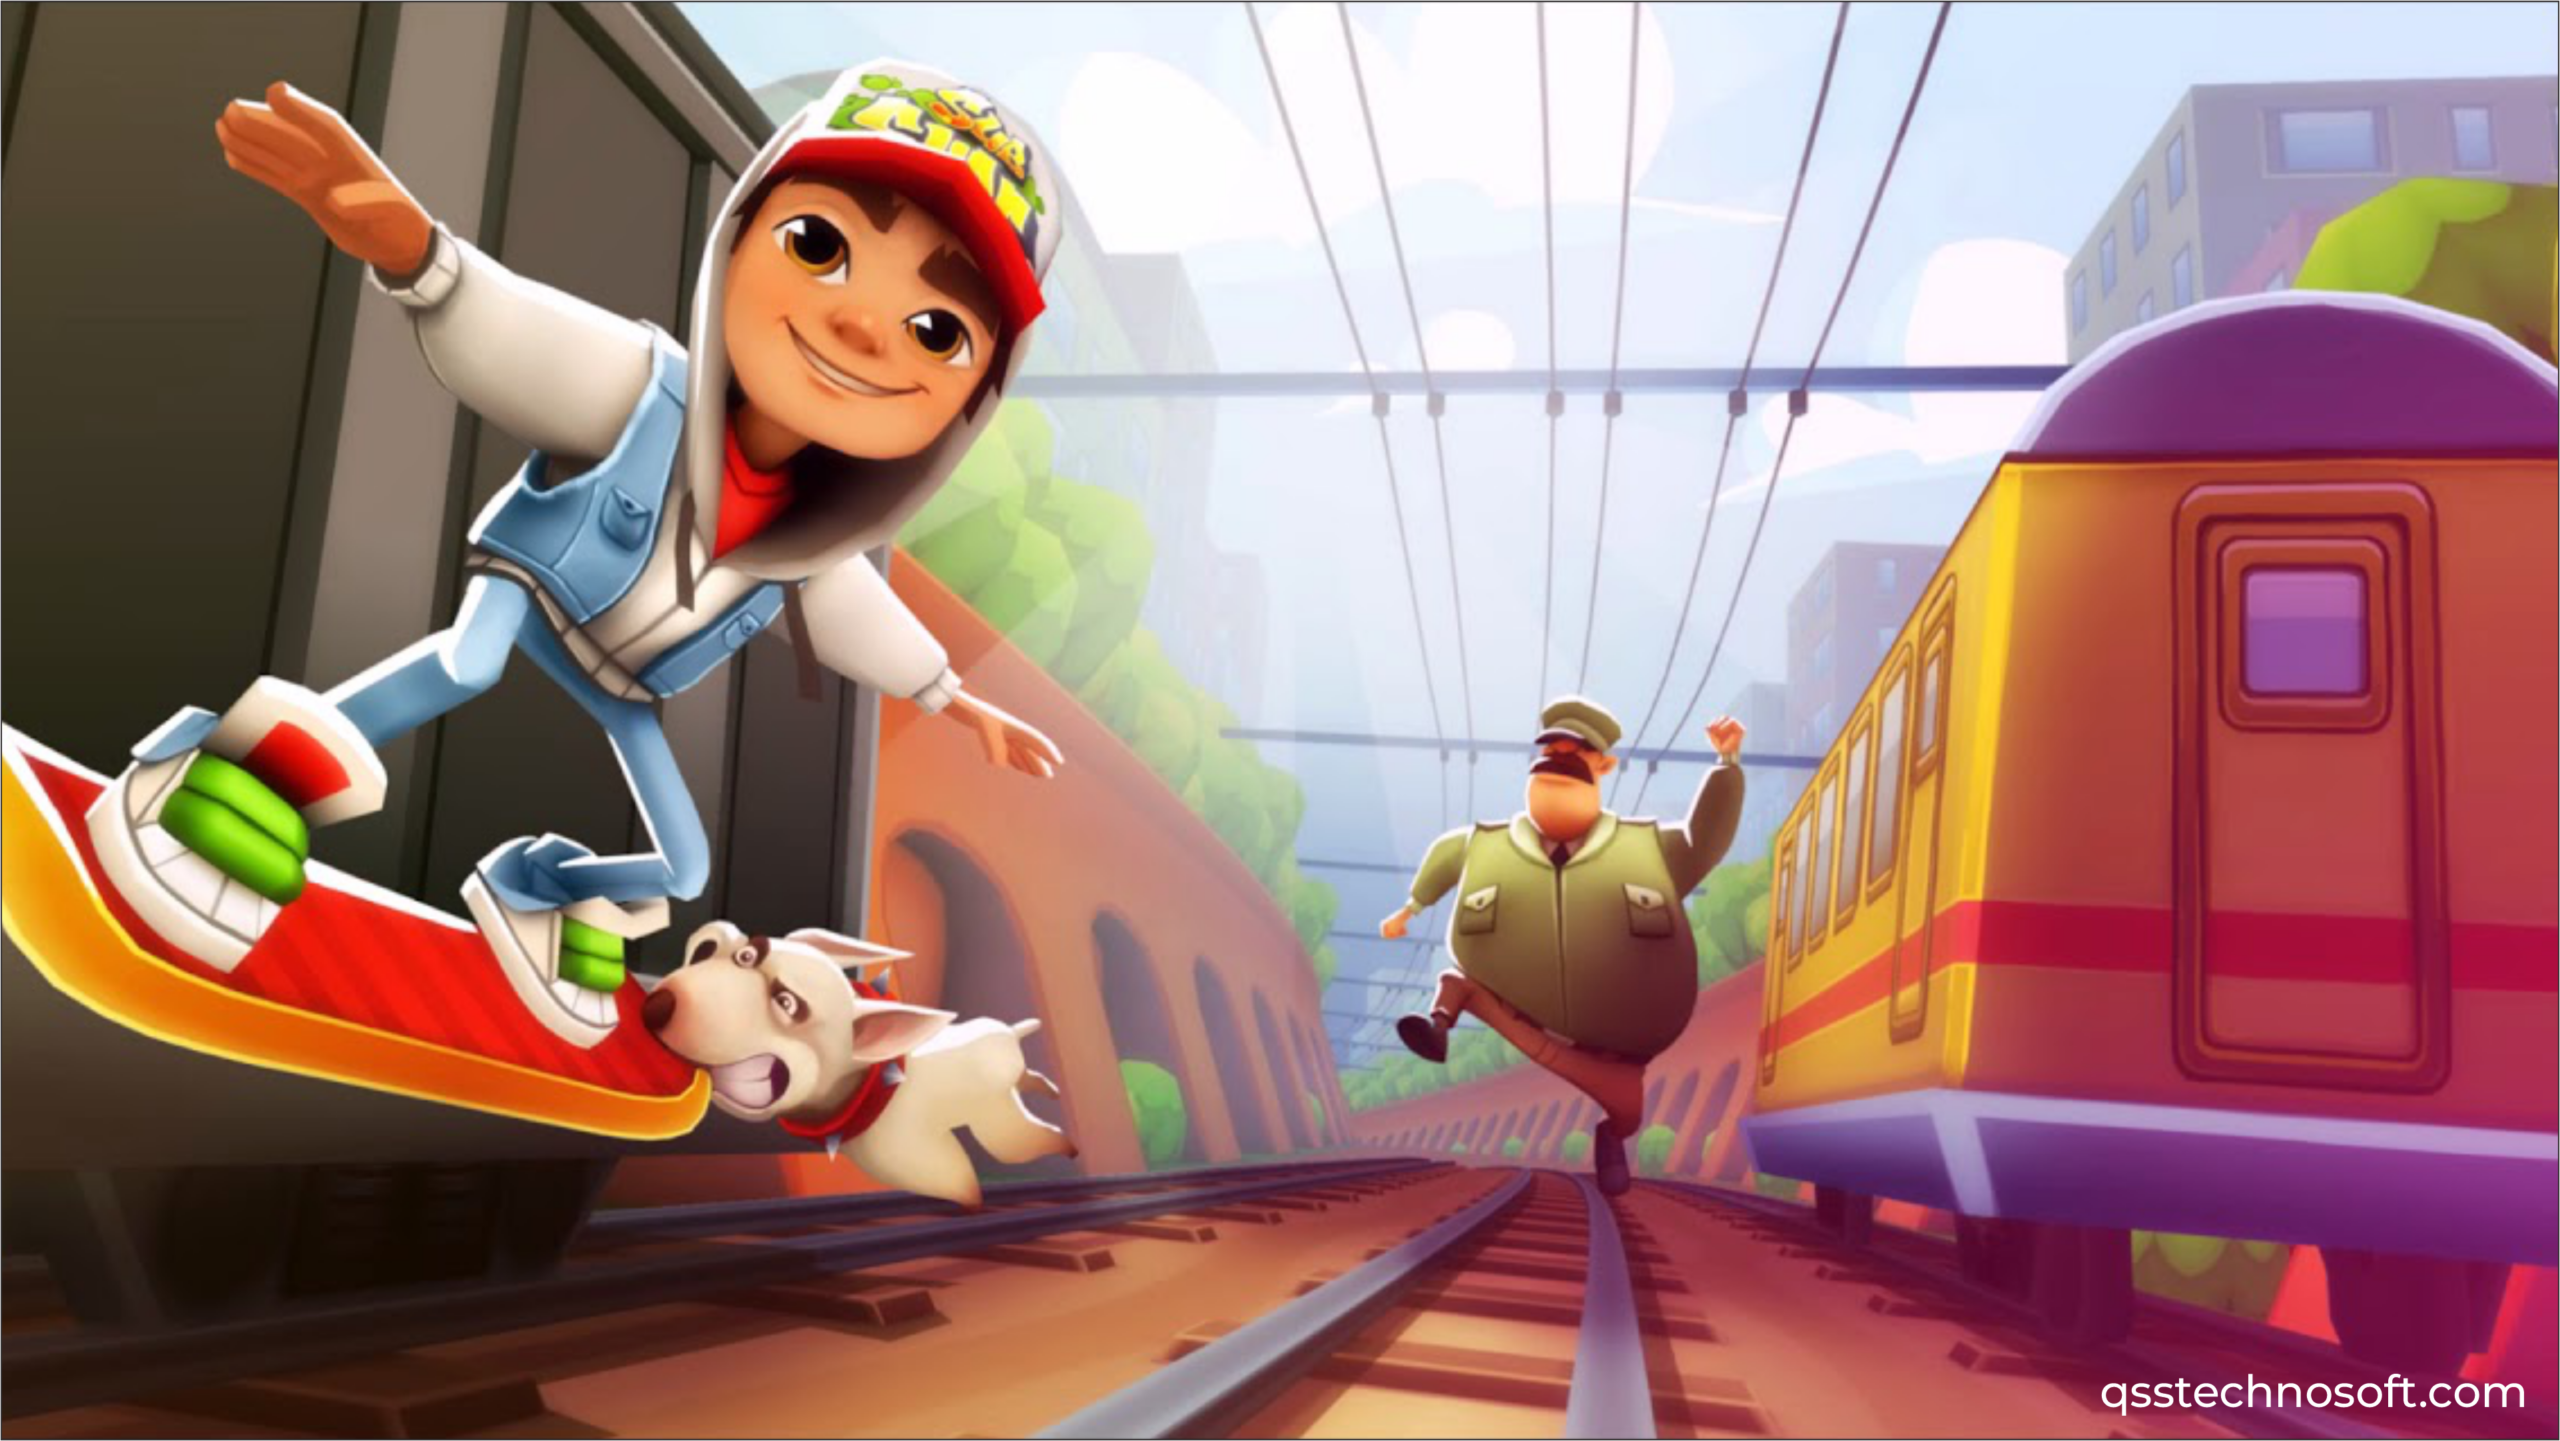 Subway Surfers: Download Guide for PC, Android, Kindle, Ios and More!